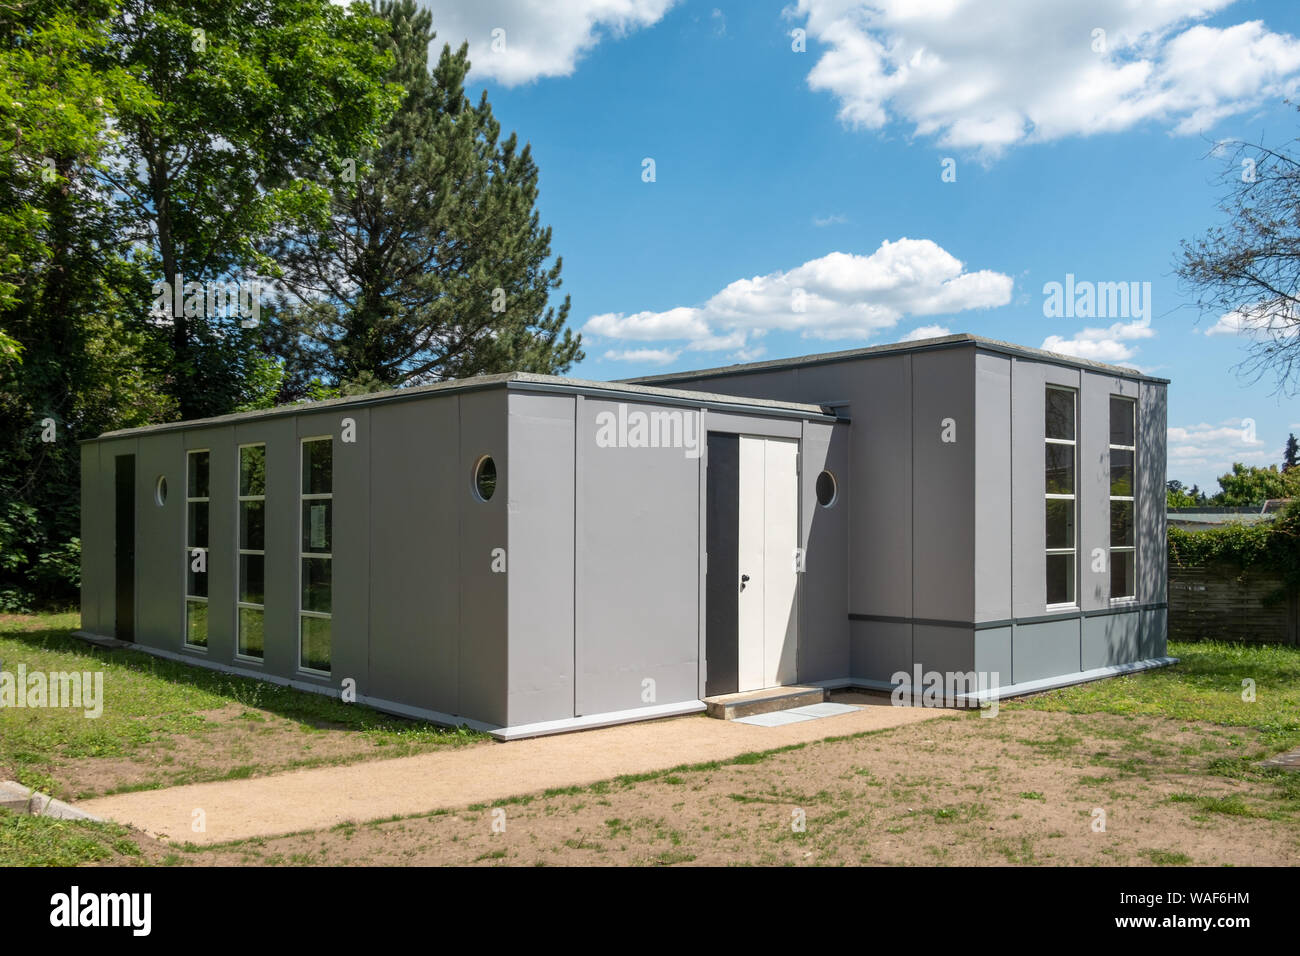 Stahlhaus Dessau, Steel House, Törten Estate, in Dessau. By Georg Muche in 1926 as prefab experiment for the Bauhaus, predicting container housing. Stock Photo